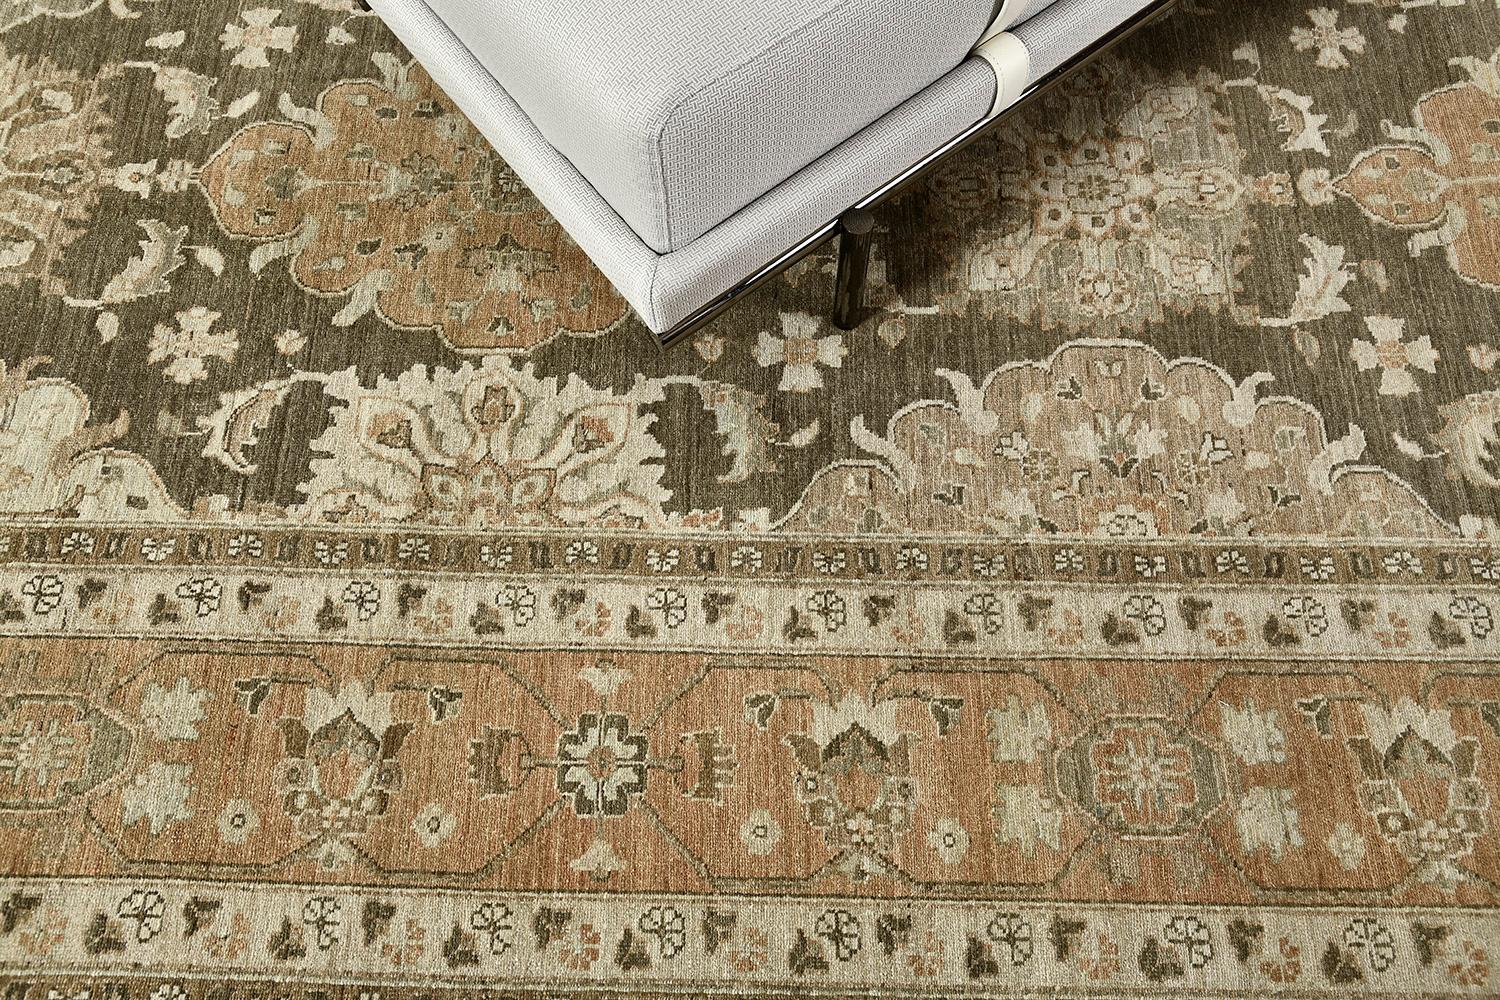 A majestic revival of vintage style Mahal rug that has an alluring impact brought about by its timeless pattern. Featuring the mesmerizing tones of terracotta, dusty blue and ivory, this elegant rug is composed of panels with florid elements